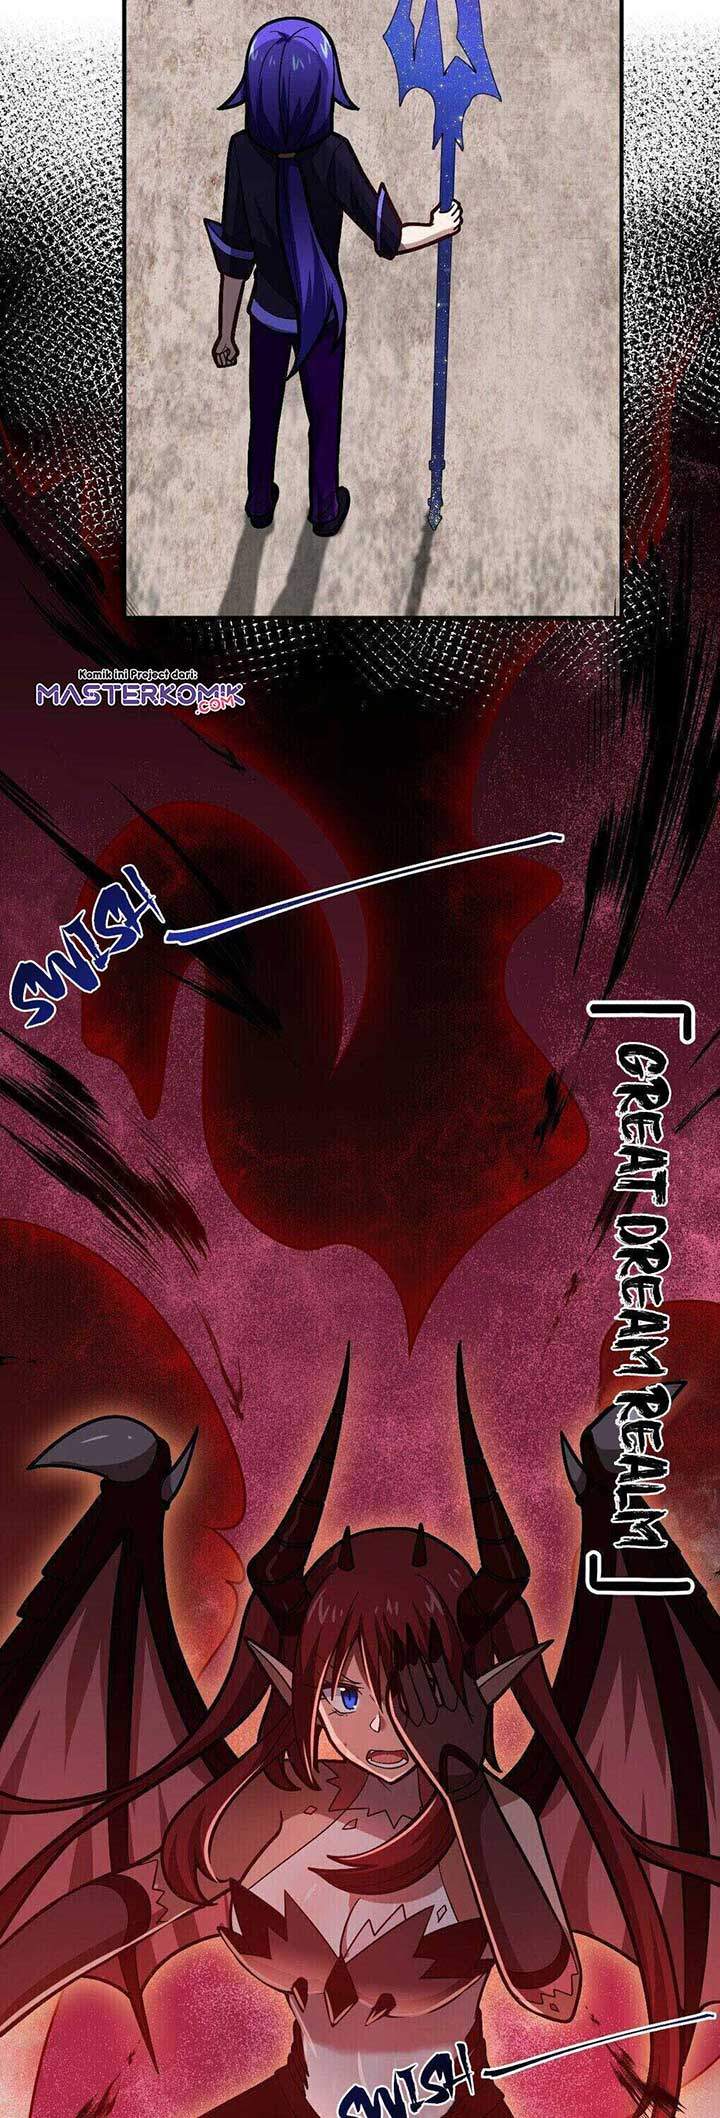 I, the Strongest Demon, Have Regained My Youth?! Chapter 40